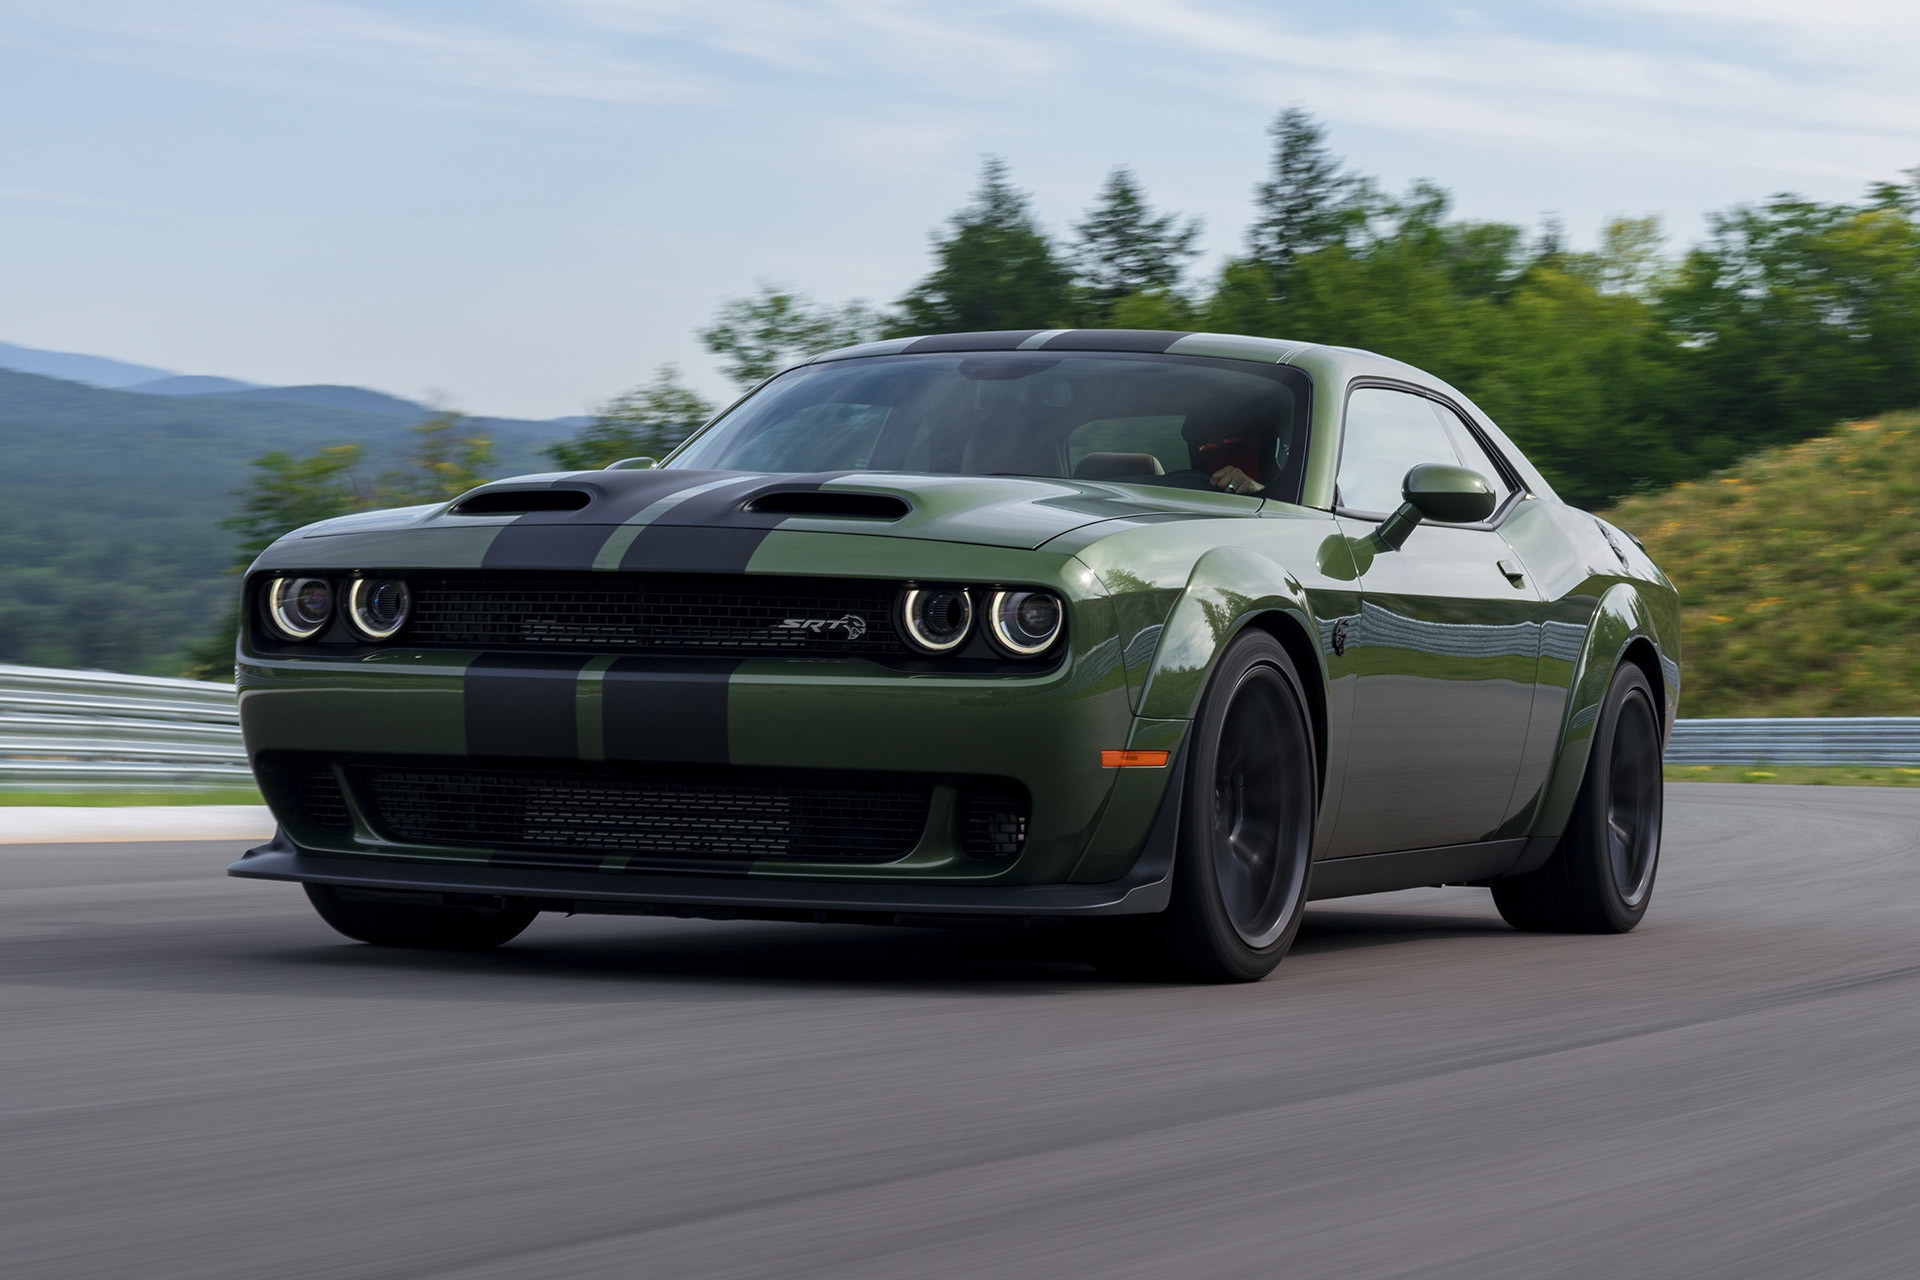 A green 2022 Dodge Challenger, being driven through a curved road on a track.